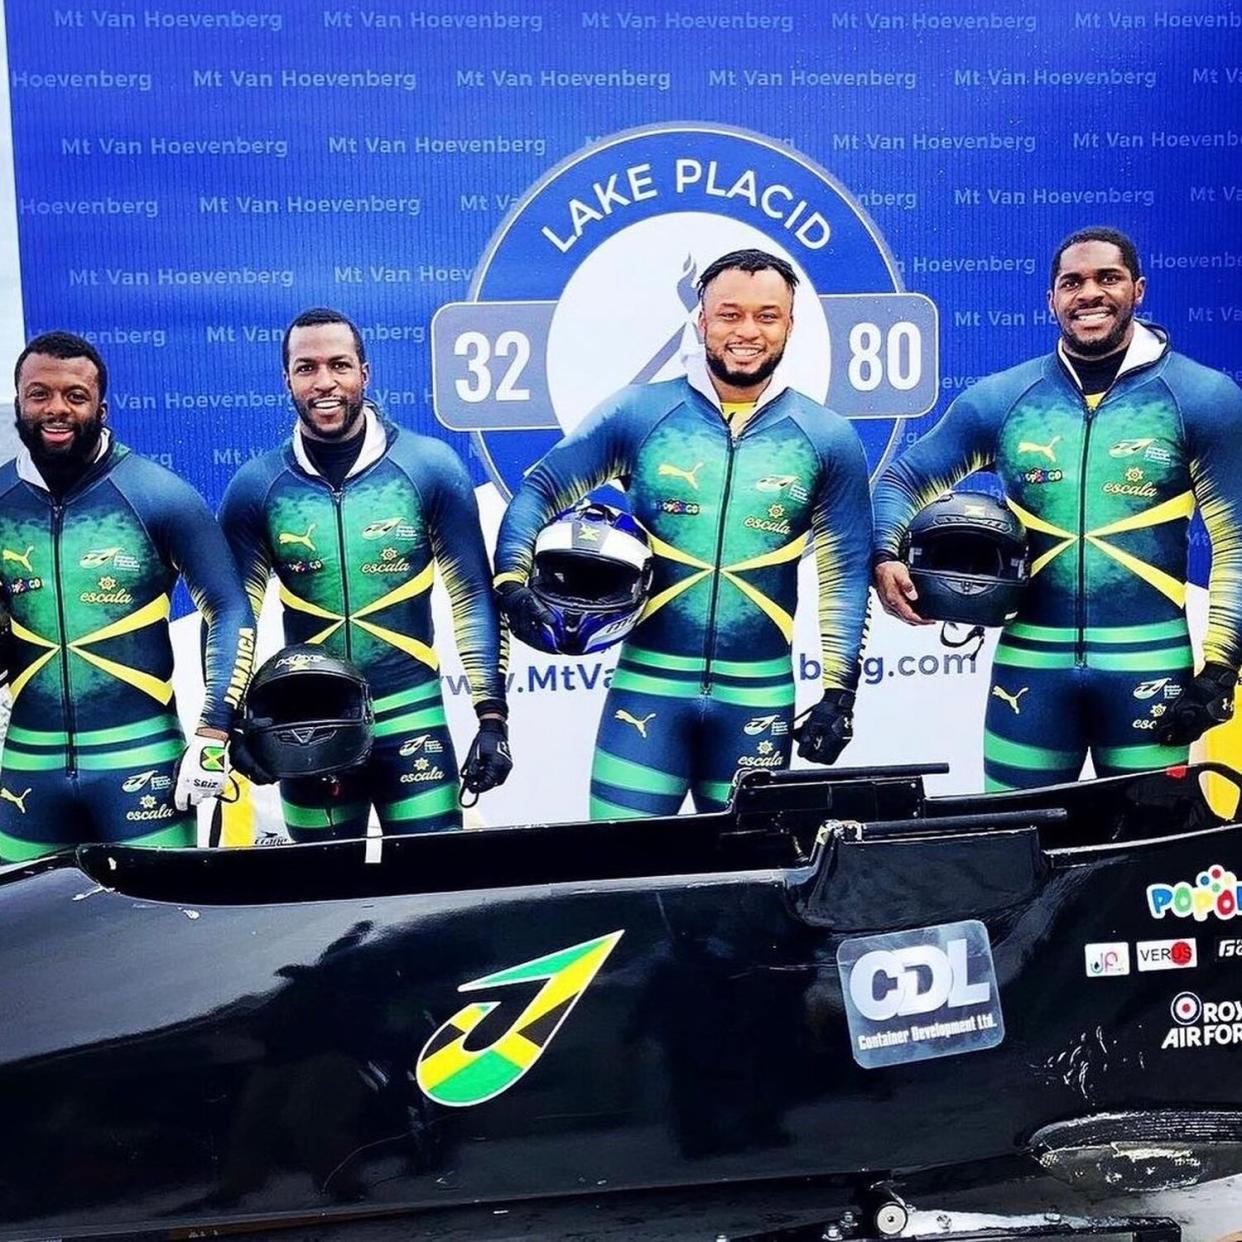 Jamaica to Send 4-Man Bobsled Team to Winter Olympics for First Time in Decades